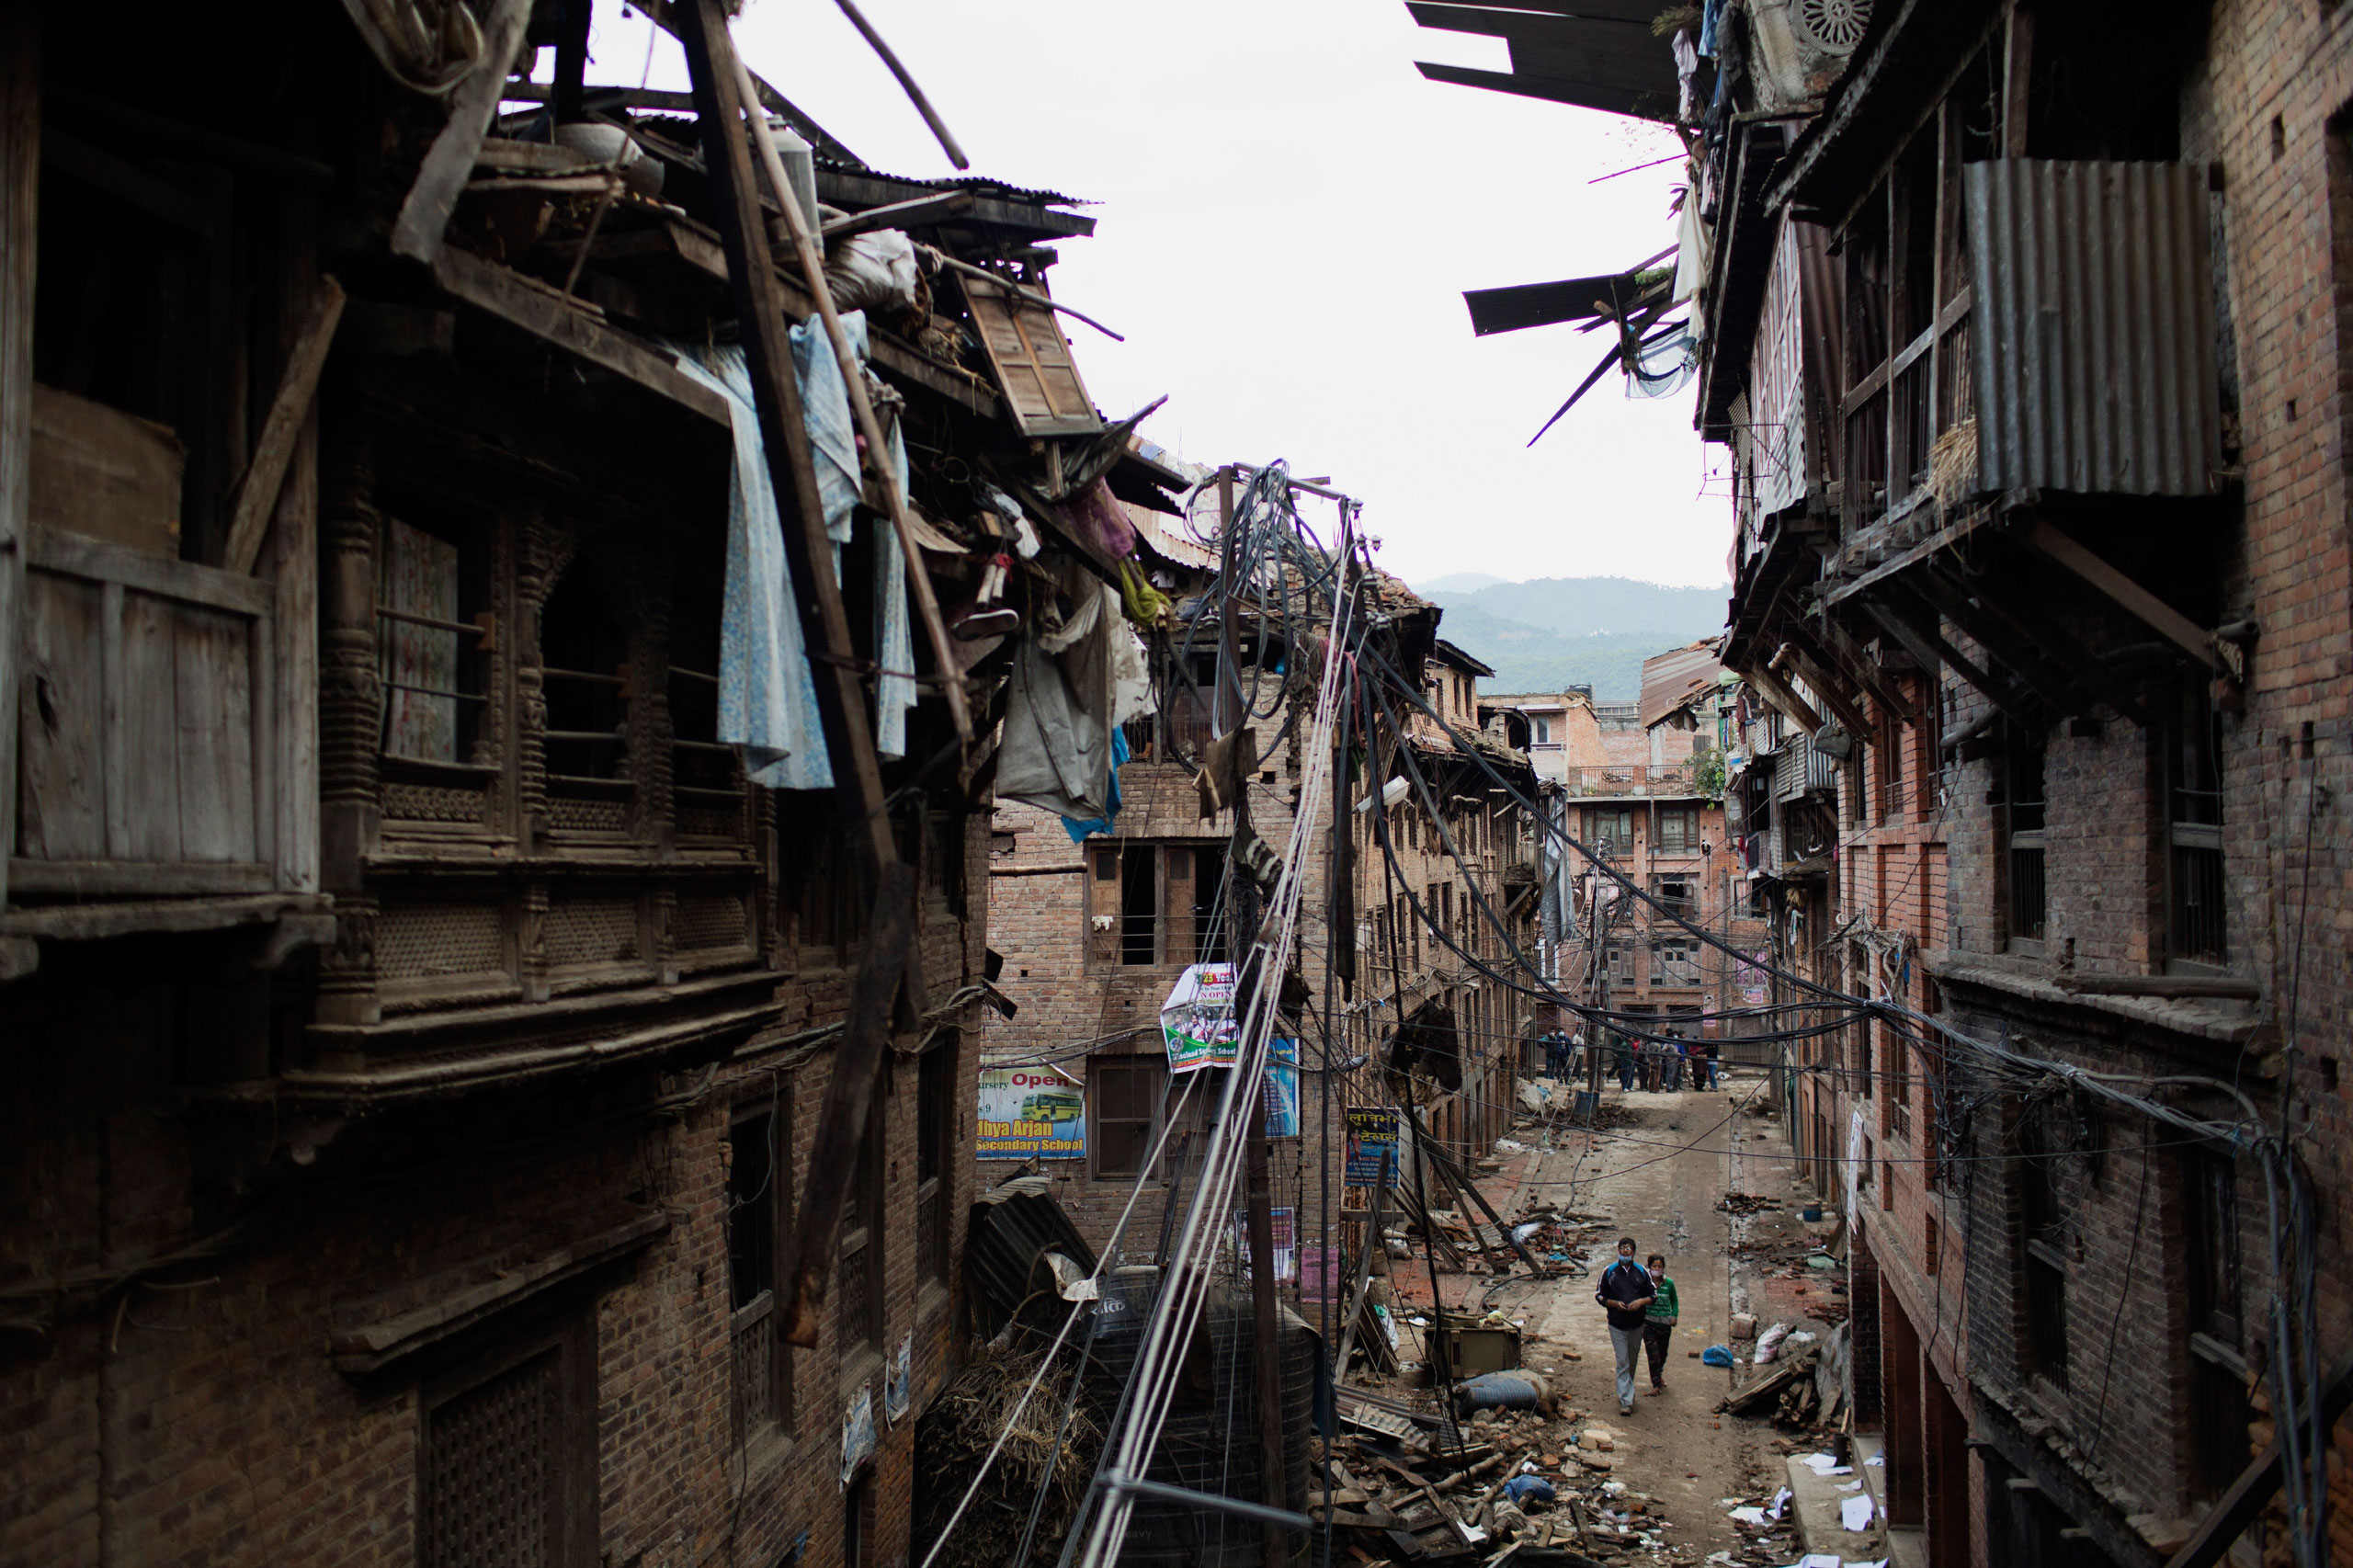 People walk through the damaged streets in the ancient city of Bhaktapur, Kathmandu Valley, April 29, 2015.